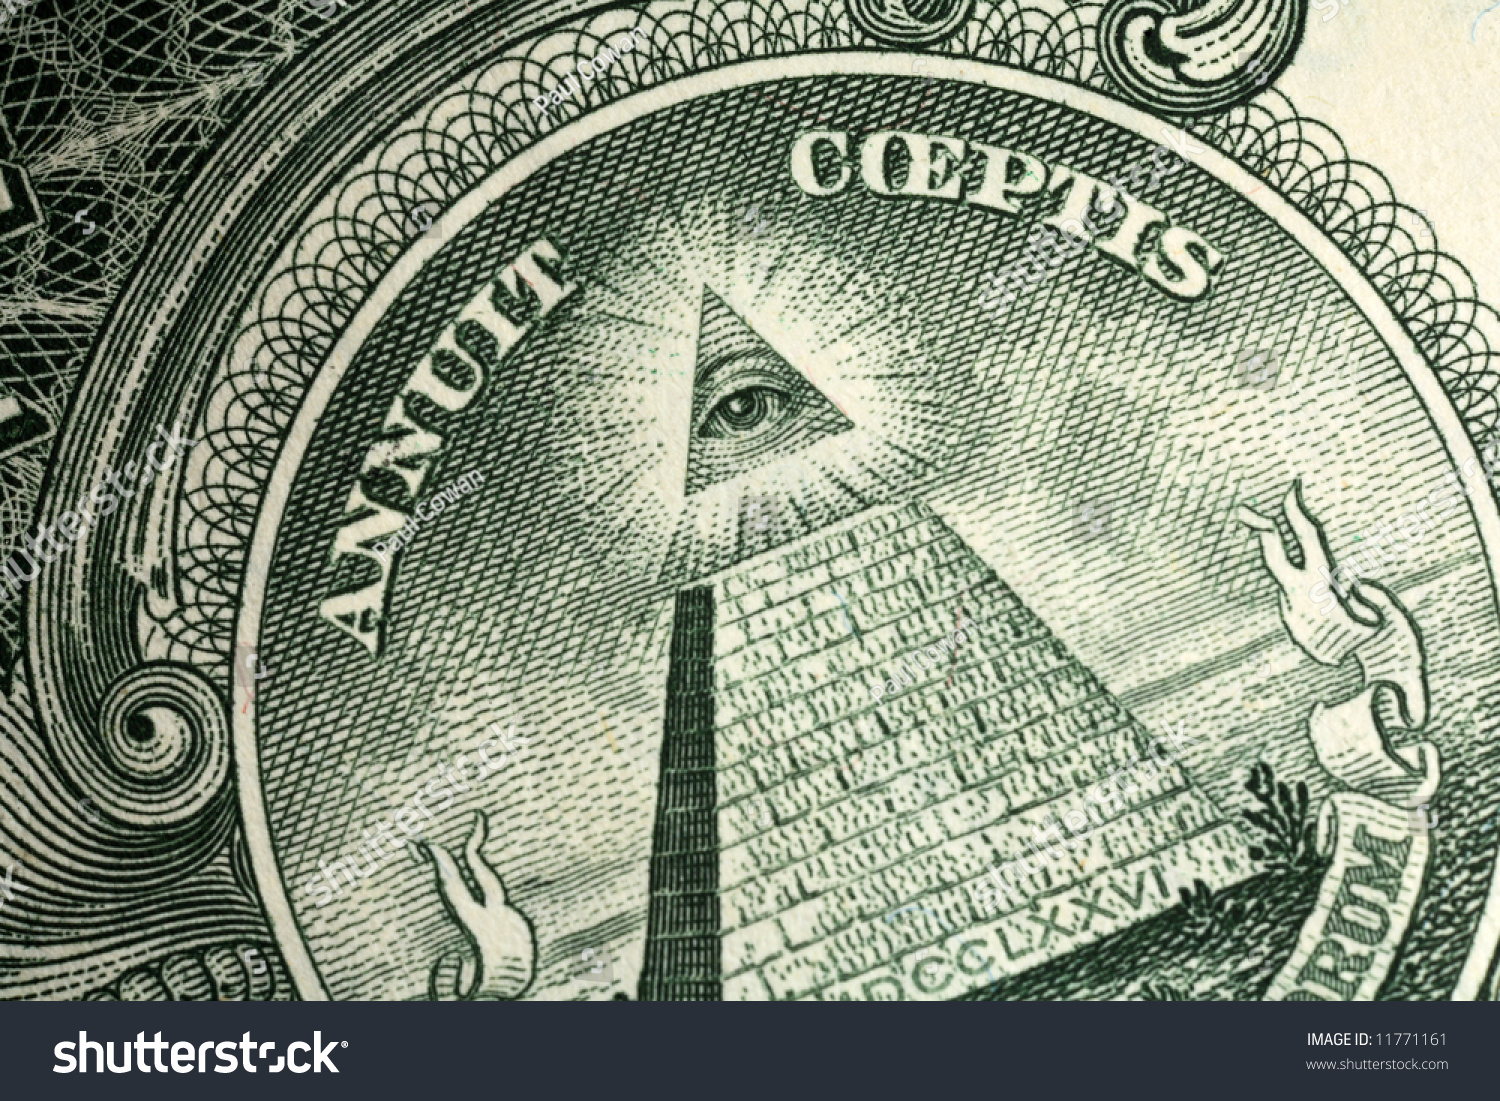 Detail From The One Dollar Bill, Showing The Pyramid With Eye And The ...